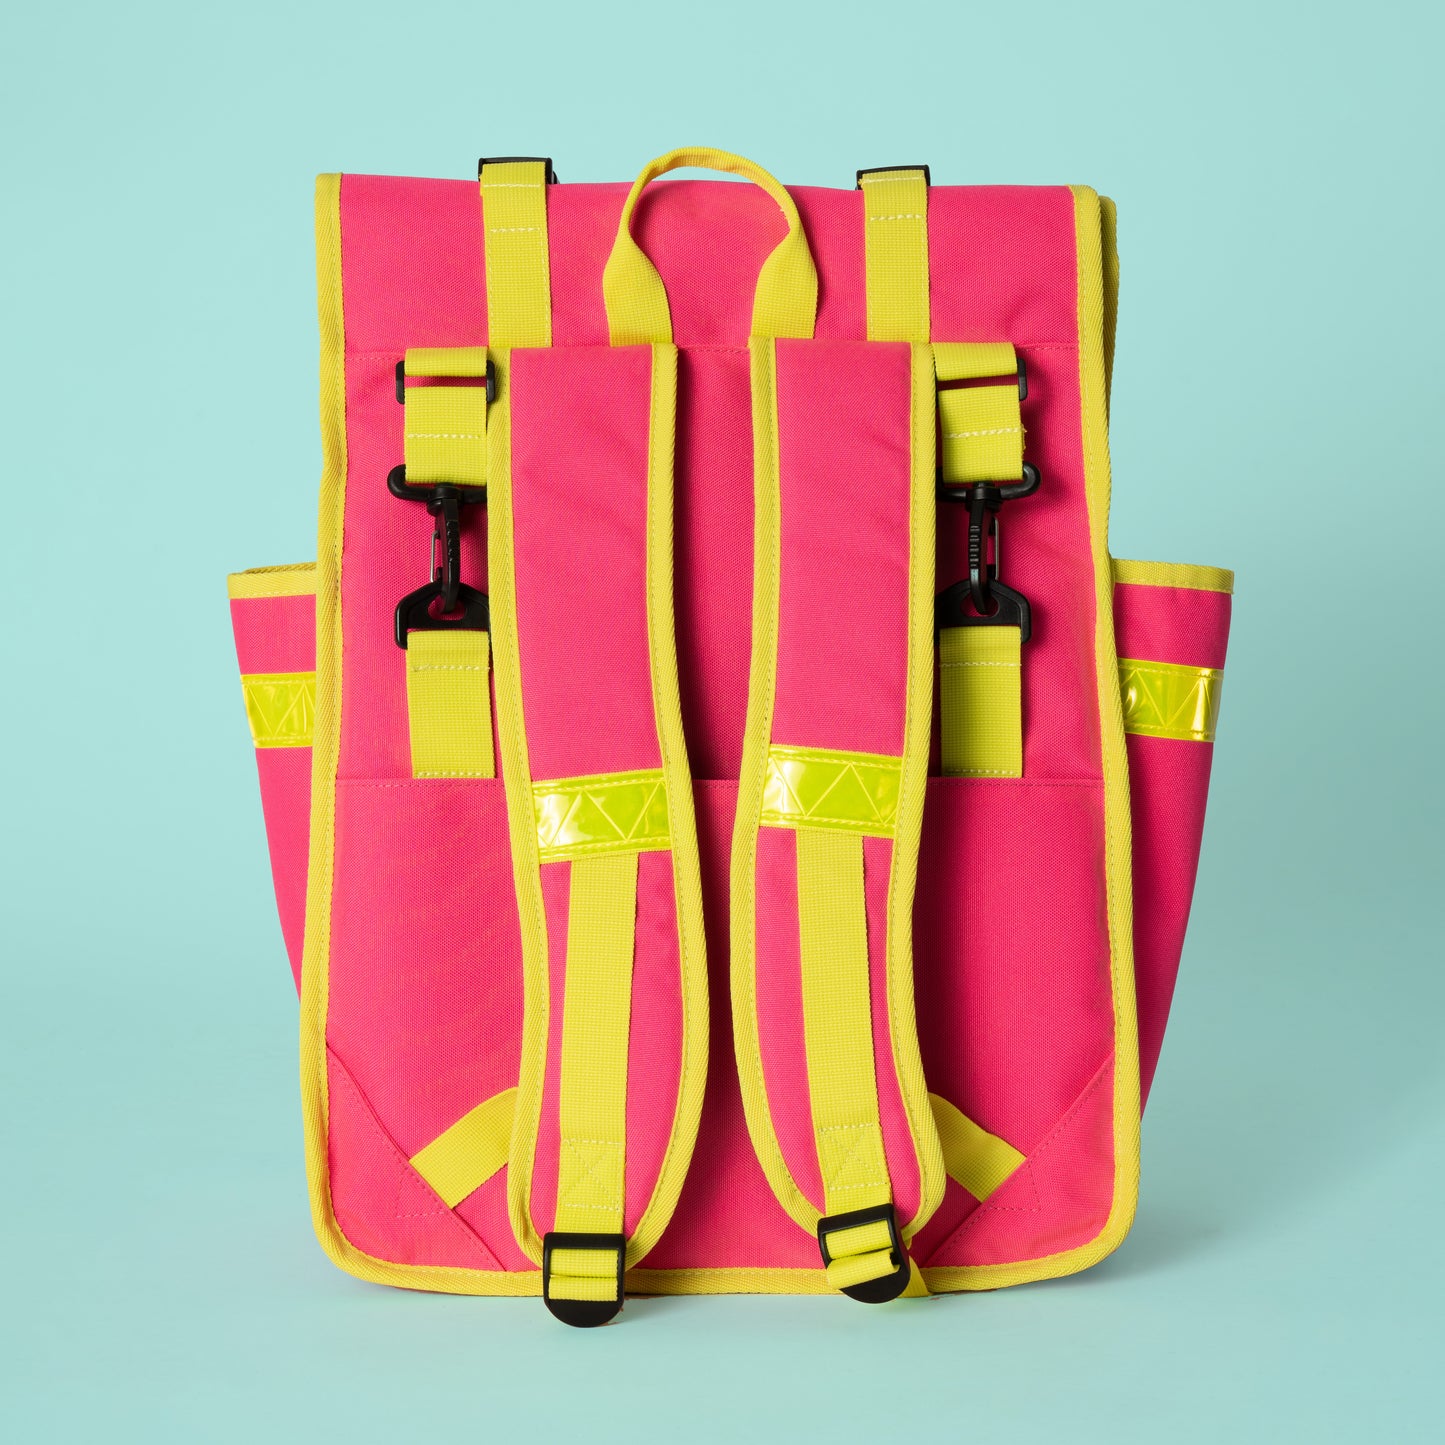 Neon pink roll top backpack